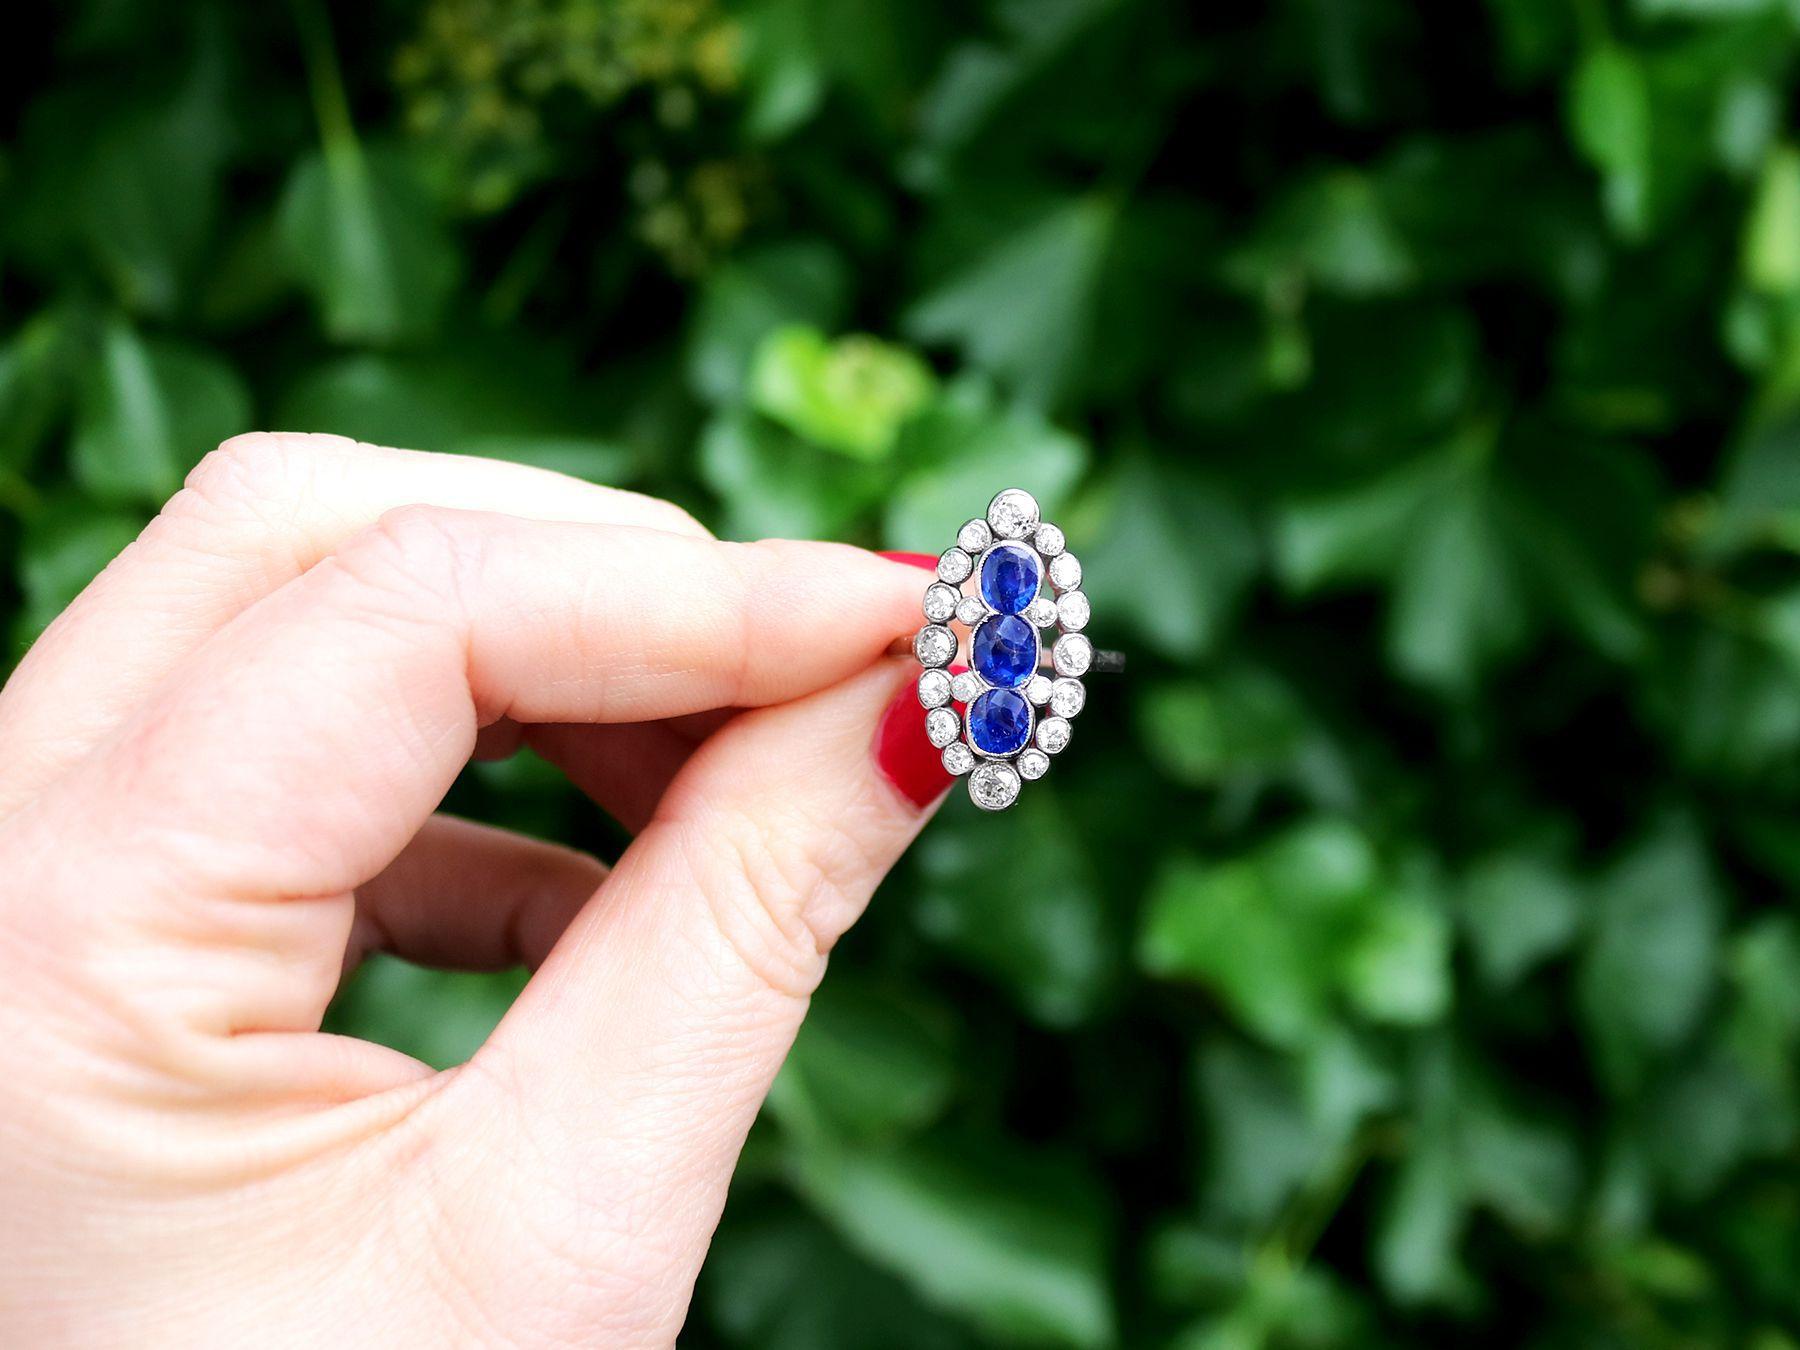 A stunning, fine and impressive antique 1.77 carat natural blue Basaltic sapphire and 1.86 carat diamond, platinum marquise shape ring; part of our antique jewelry collections.

This stunning, fine and impressive antique sapphire and diamond ring